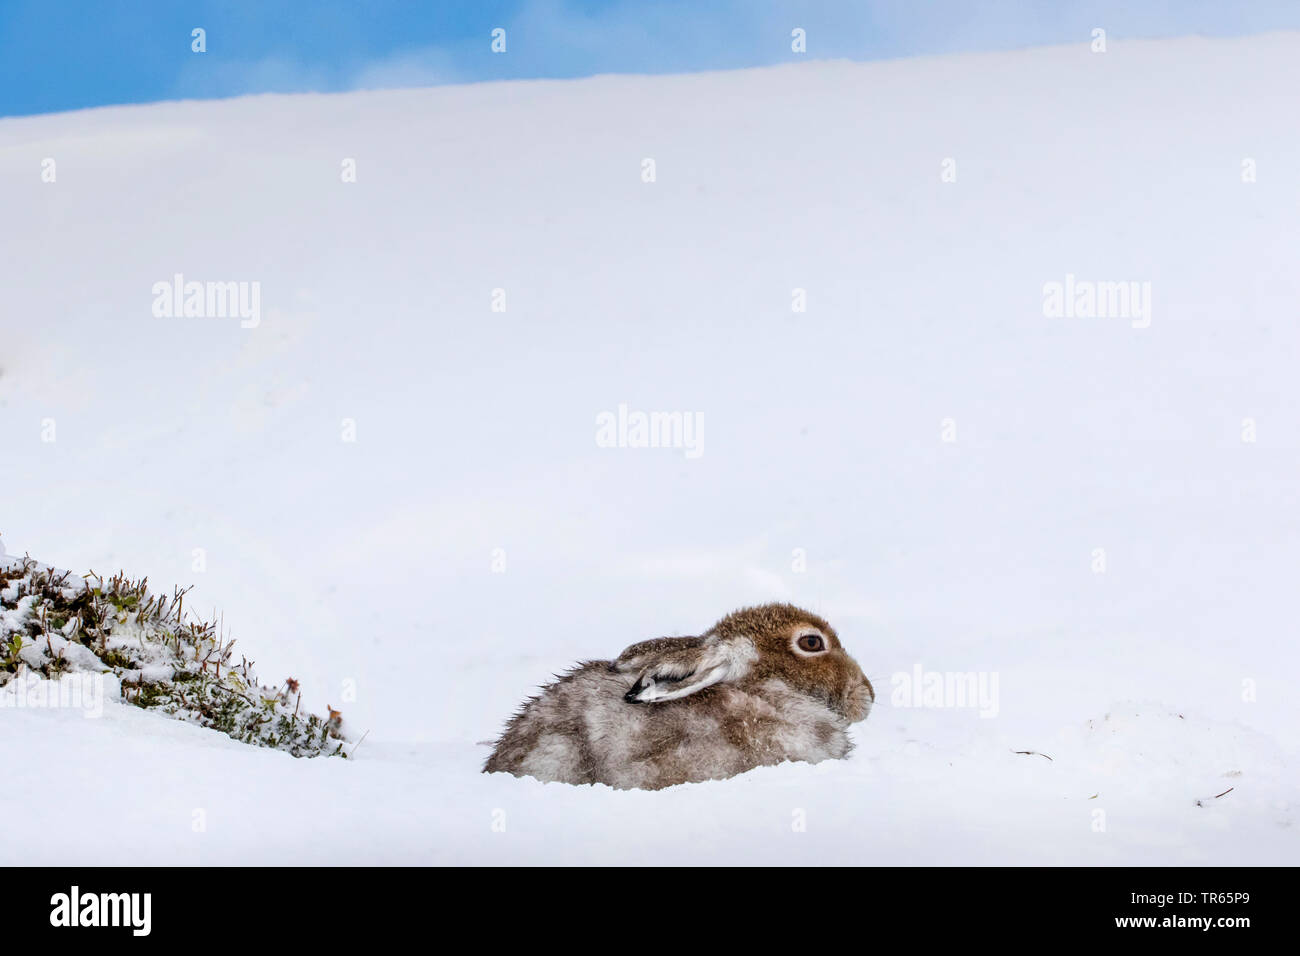 Scottish blue hare, mountain hare, white hare, Eurasian Arctic hare (Lepus timidus scotticus, Lepus scotticus), sitting in a snowy hollow, side view, United Kingdom, Scotland, Cairngorms National Park, Aviemore Stock Photo